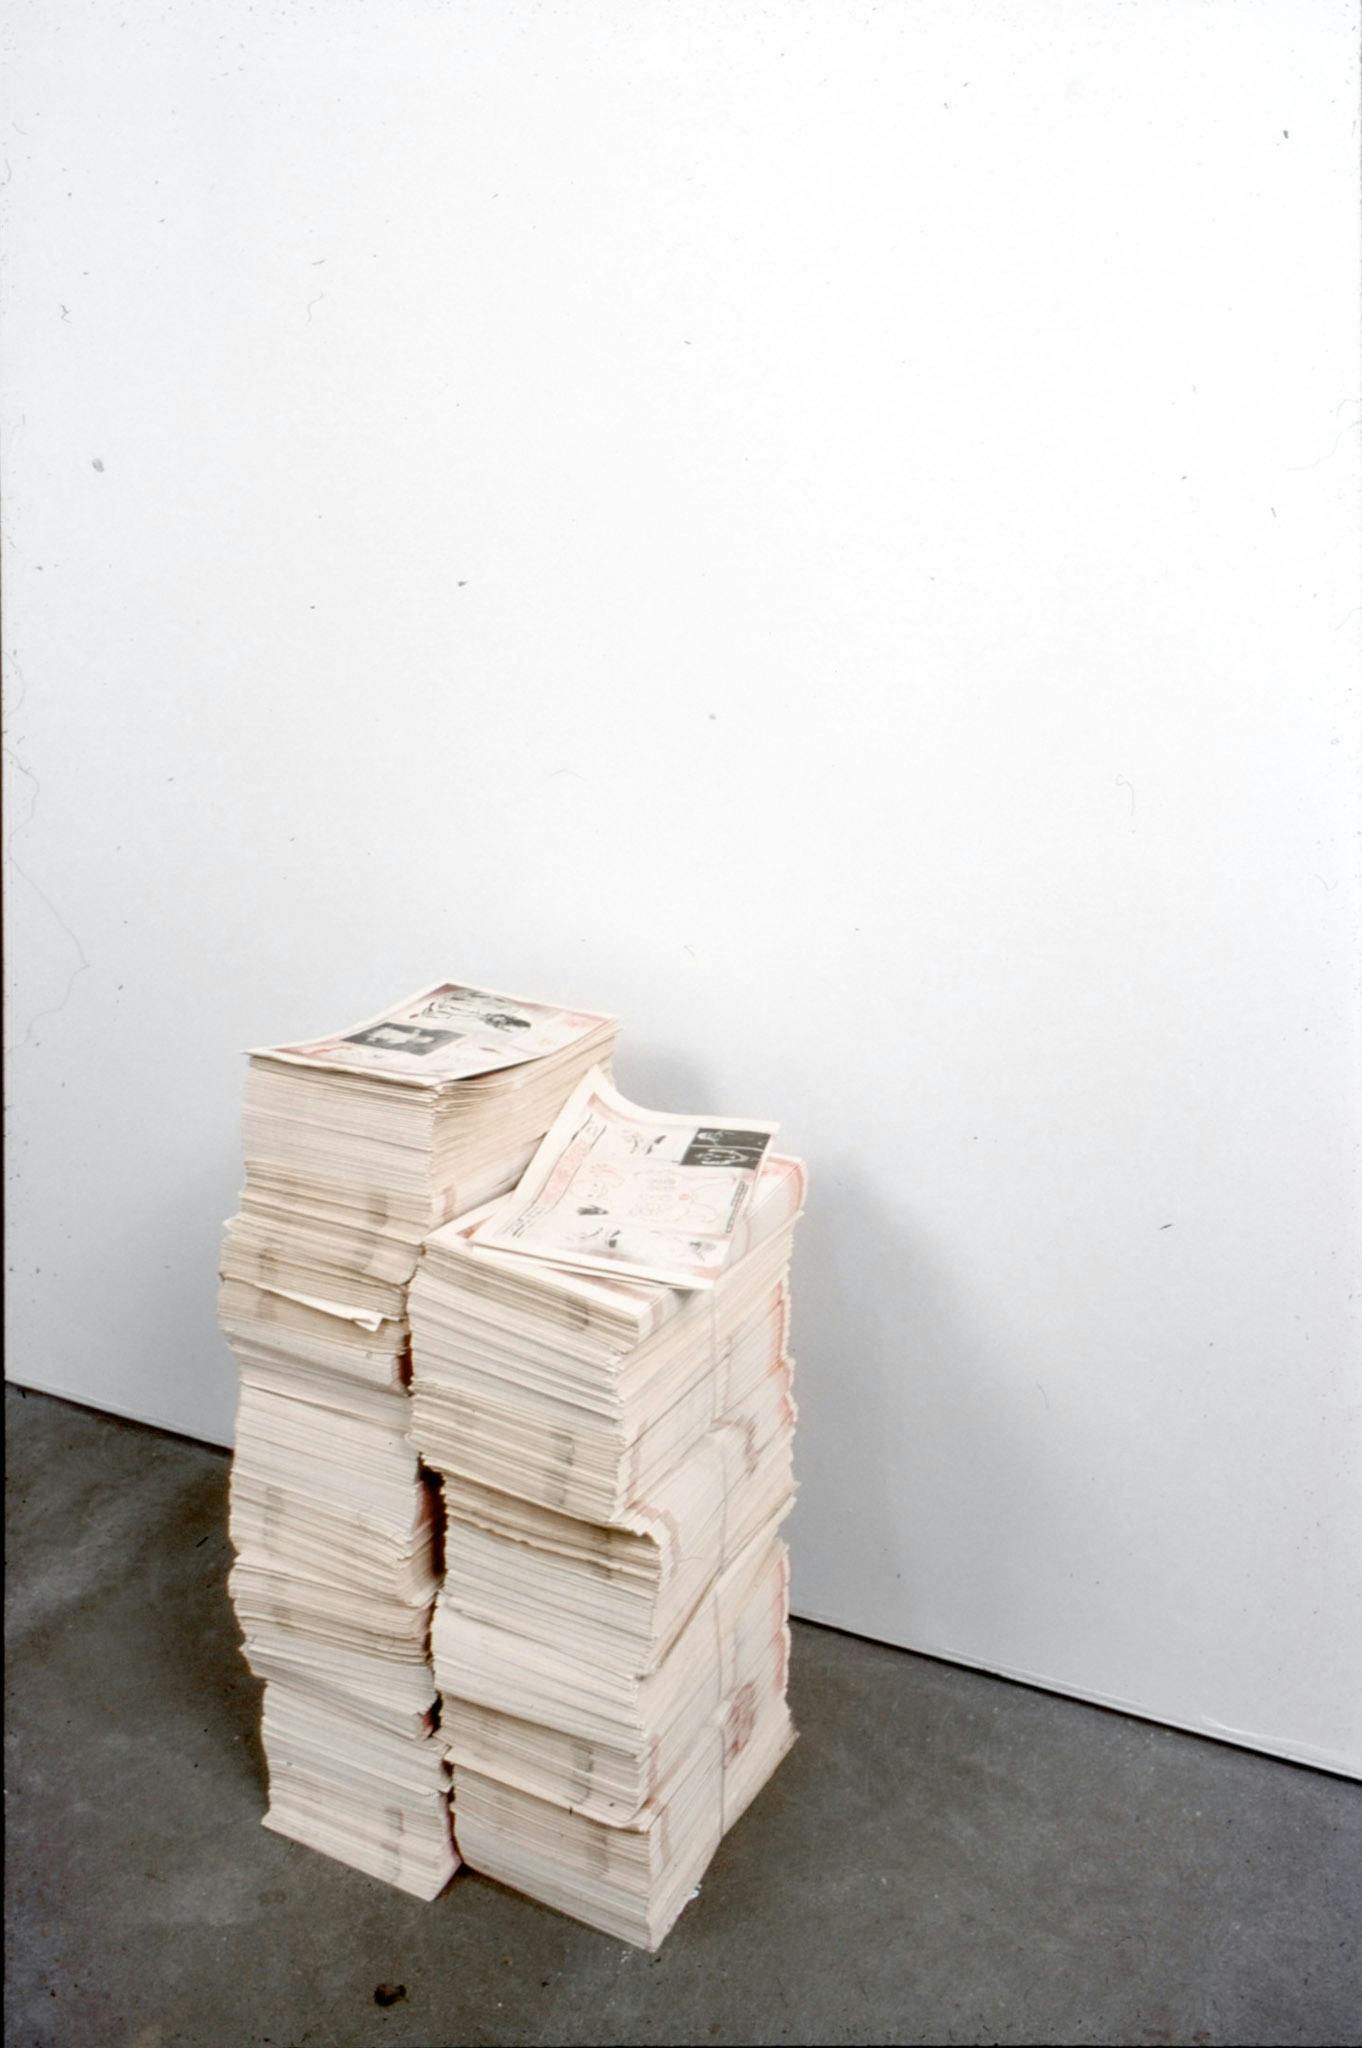 Two piles of newspaper-style publications are placed directly on a gallery wall. They are the publication titled I Got Killed, I Got Killed, I Got Killed in World War III that accompanied this group exhibition.